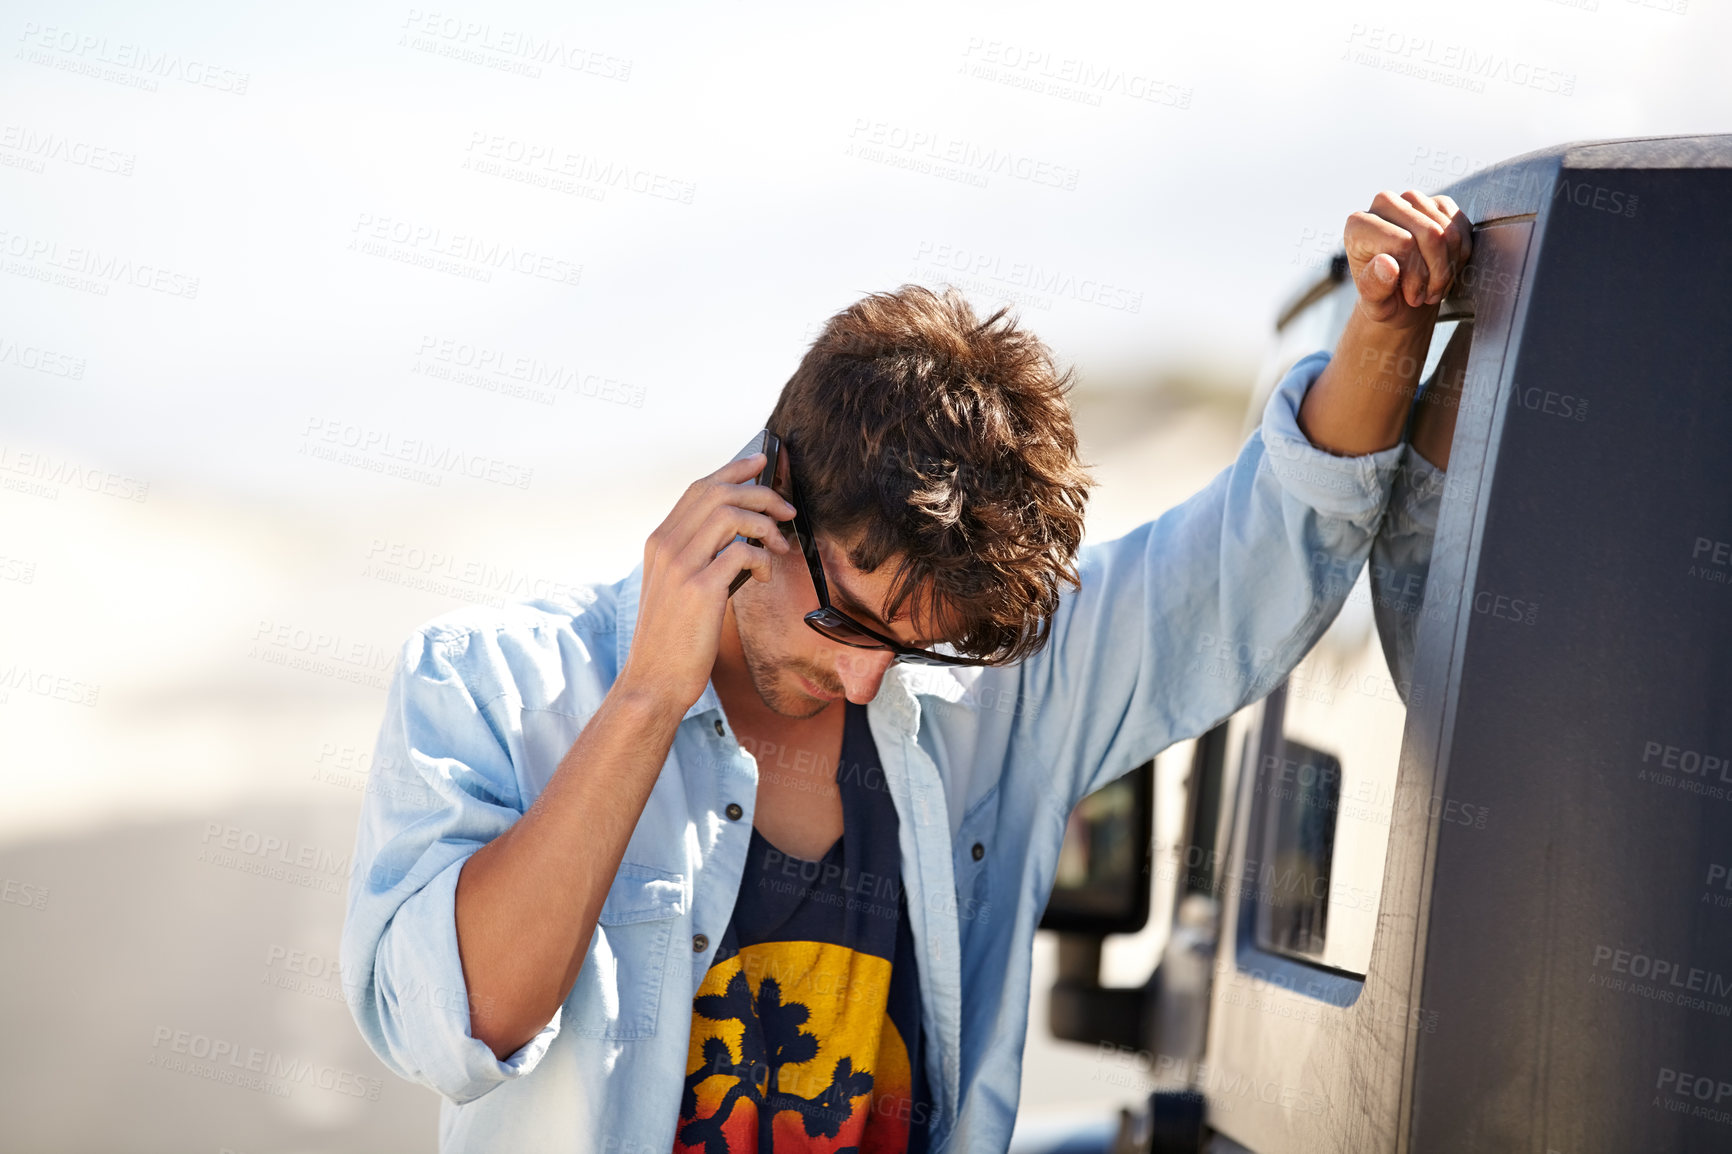 Buy stock photo Roadside assistance, phone call and man by car in conversation, travel or journey outdoor. Smartphone, help and person with truck breakdown, transportation insurance or emergency problem on road trip